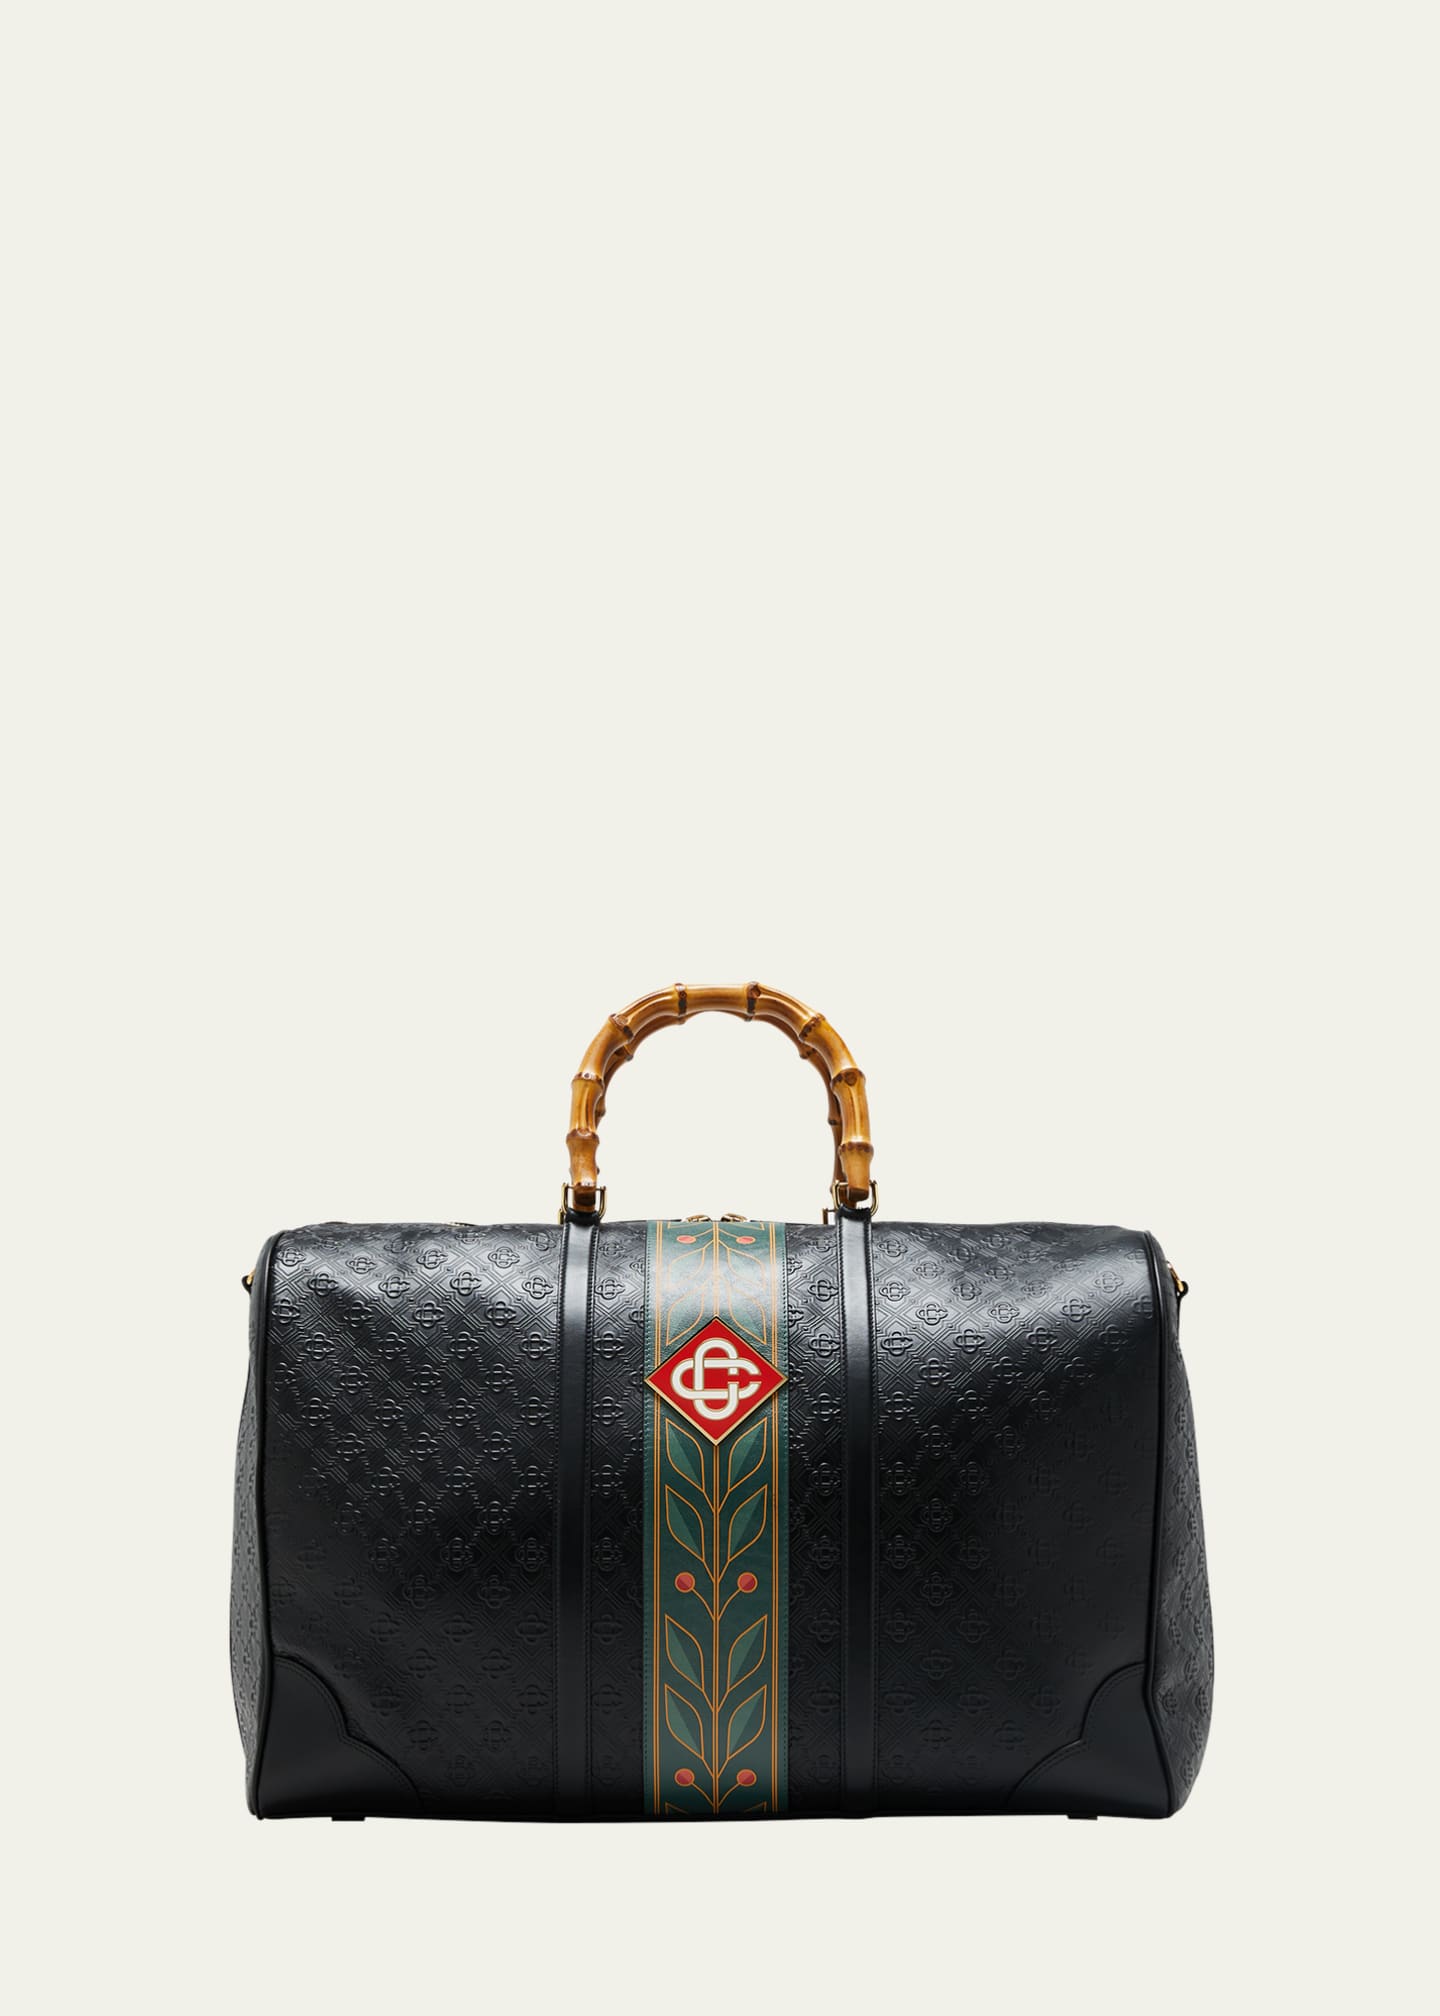  GG Supreme Monogram Night Patches Carry On Duffle